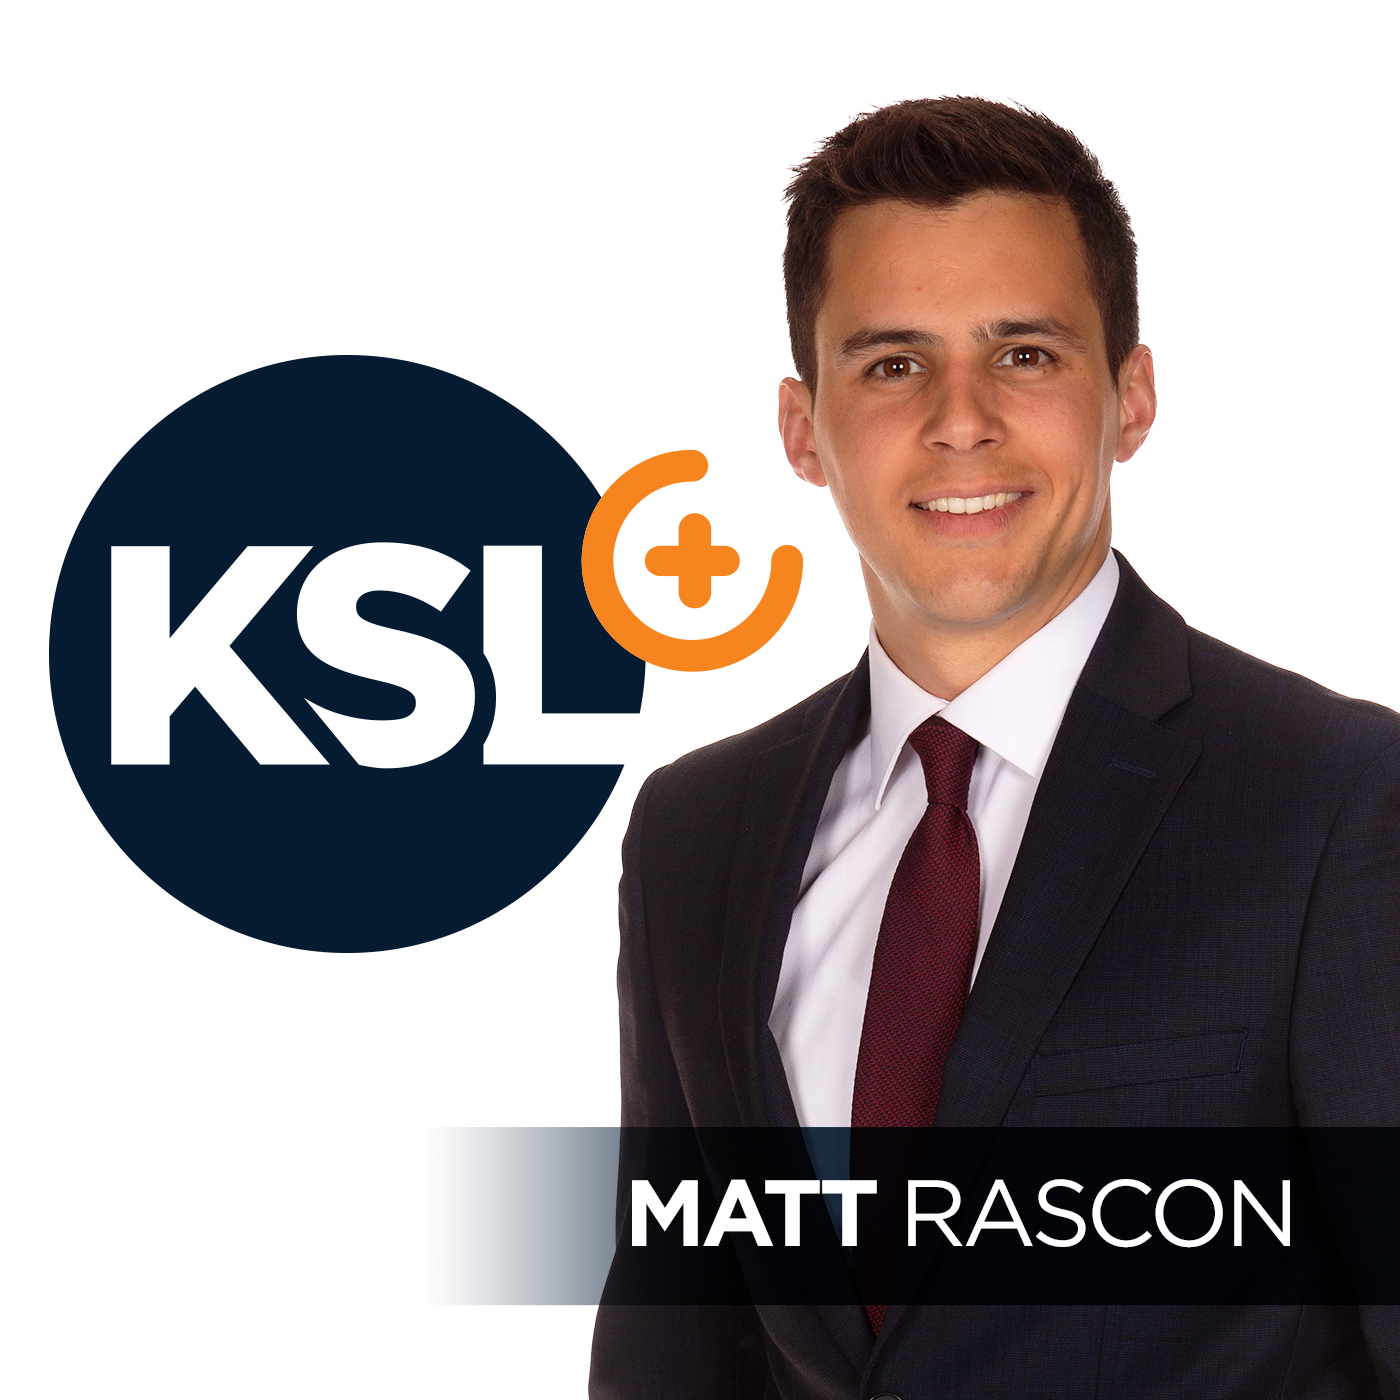 KSL+: Efficacy of police pursuits